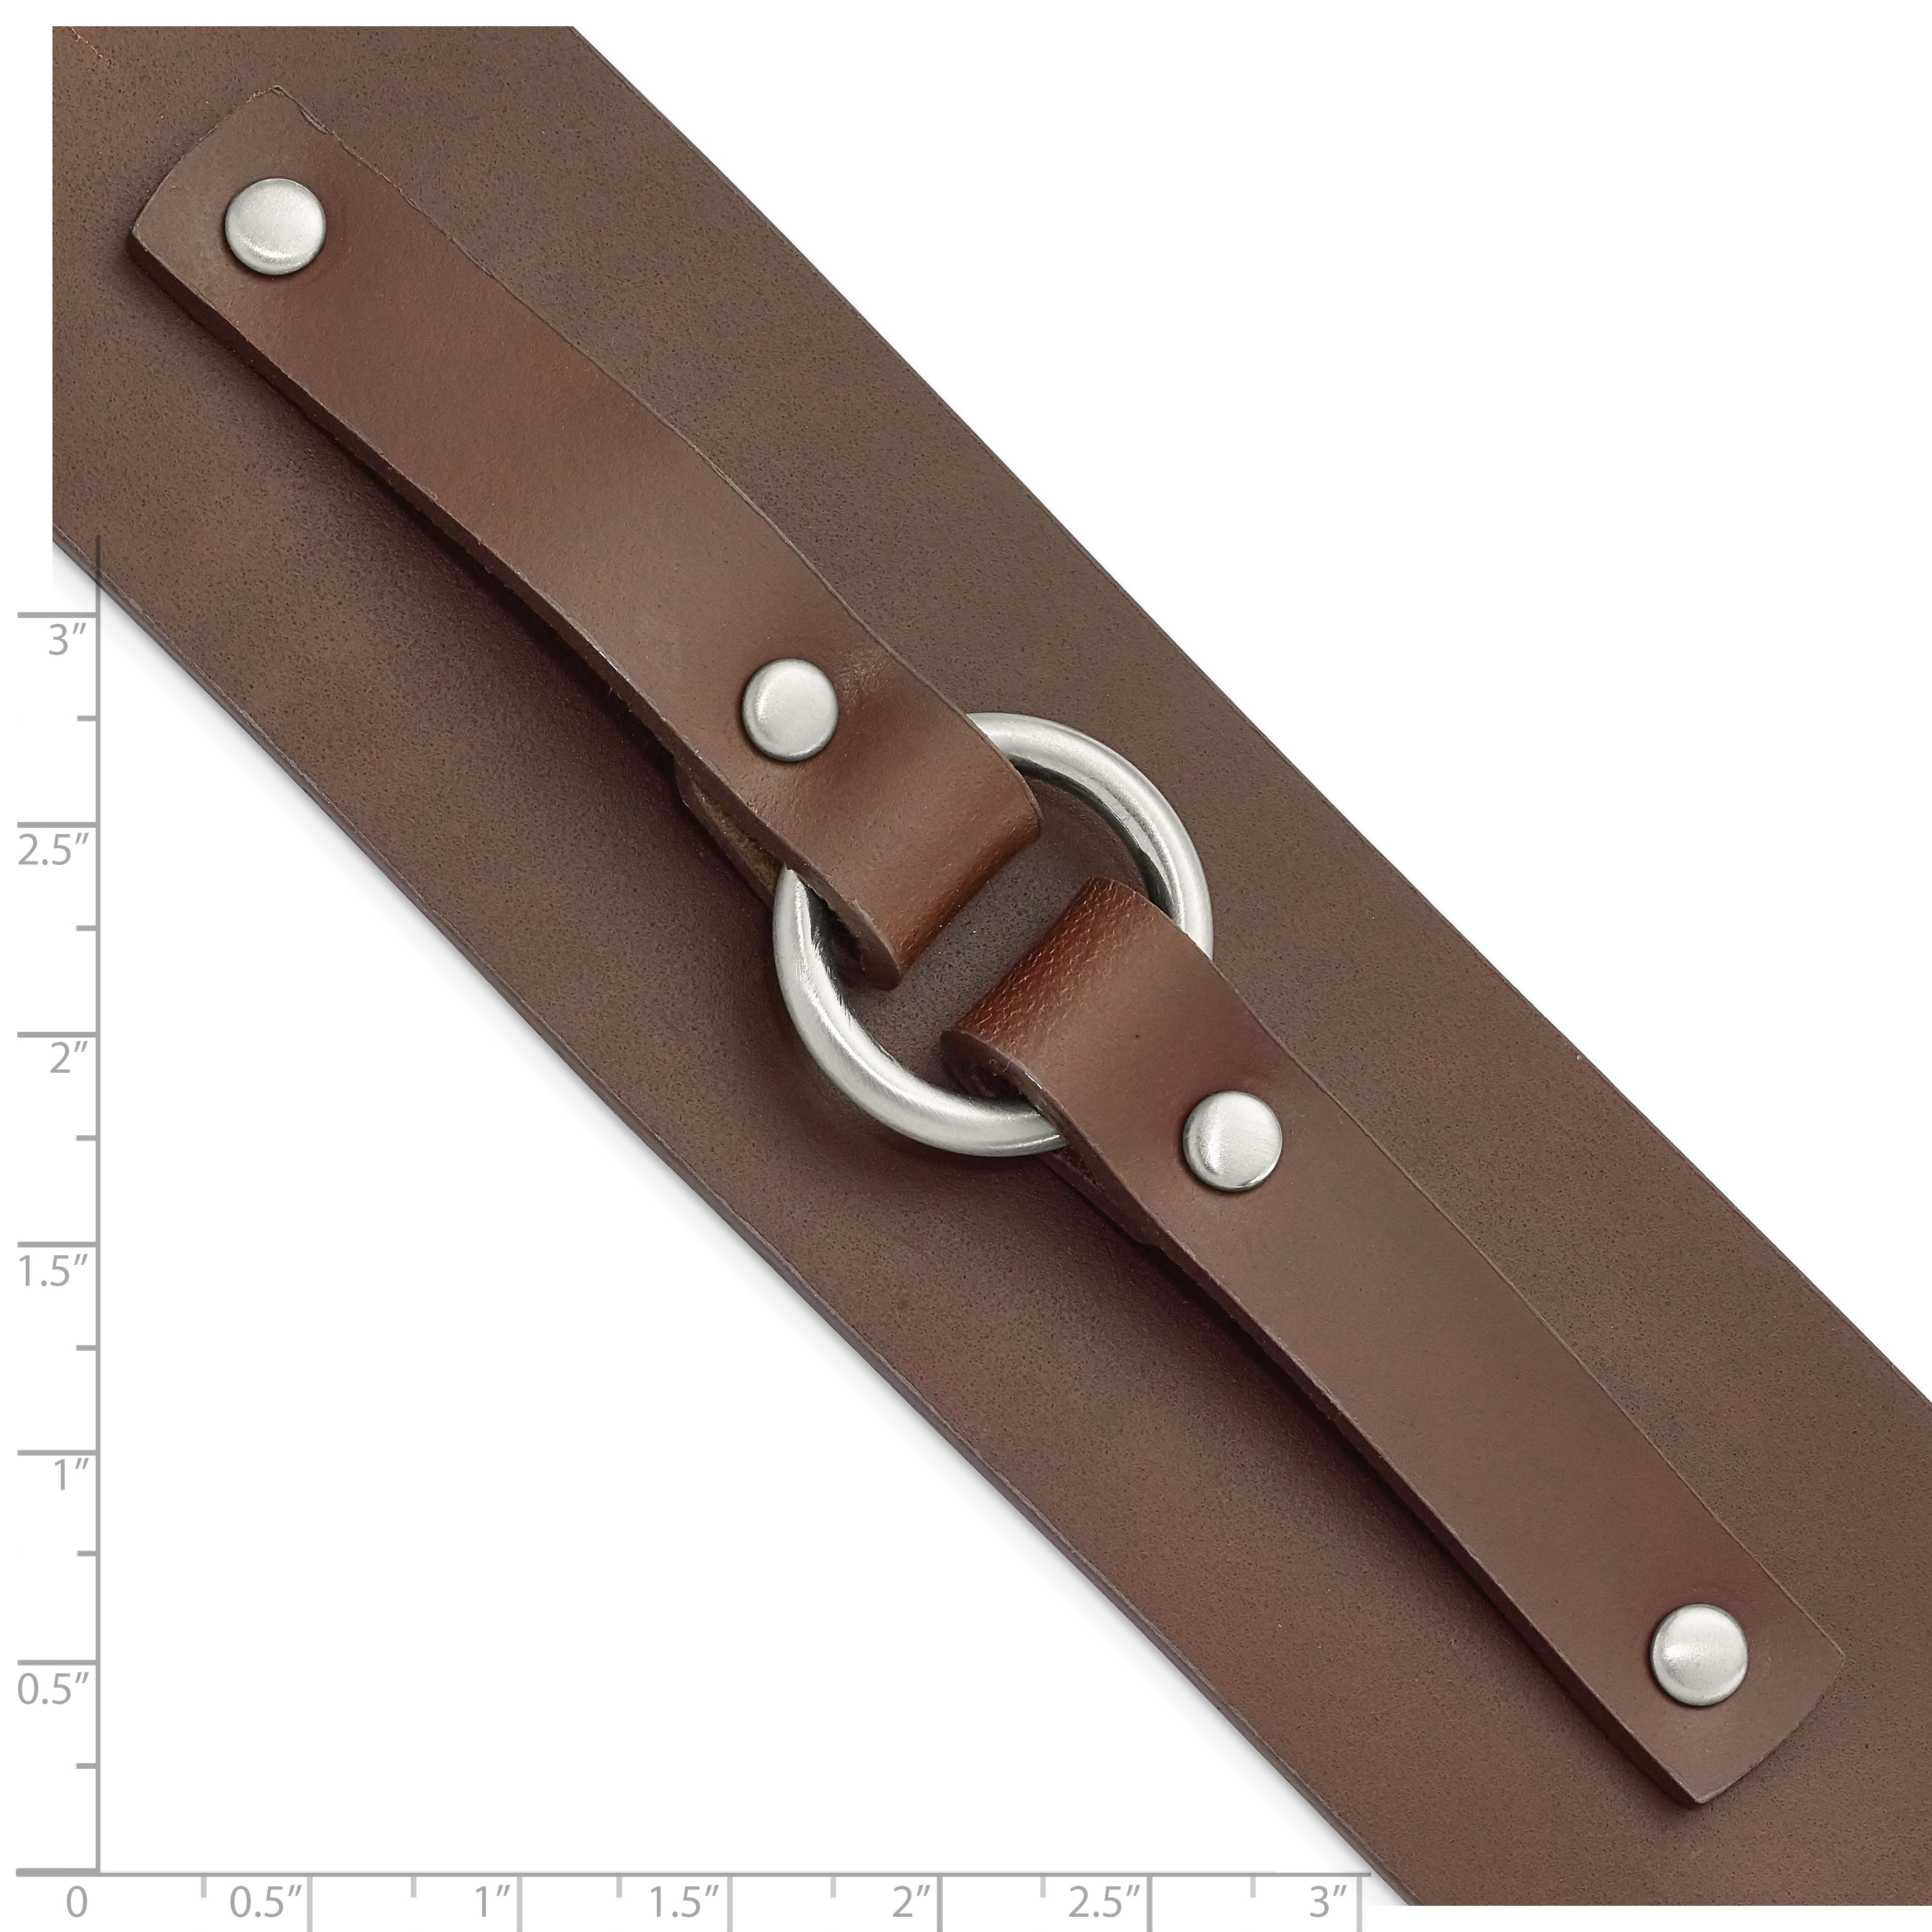 Stainless Steel Satin Brown Leather Bracelet